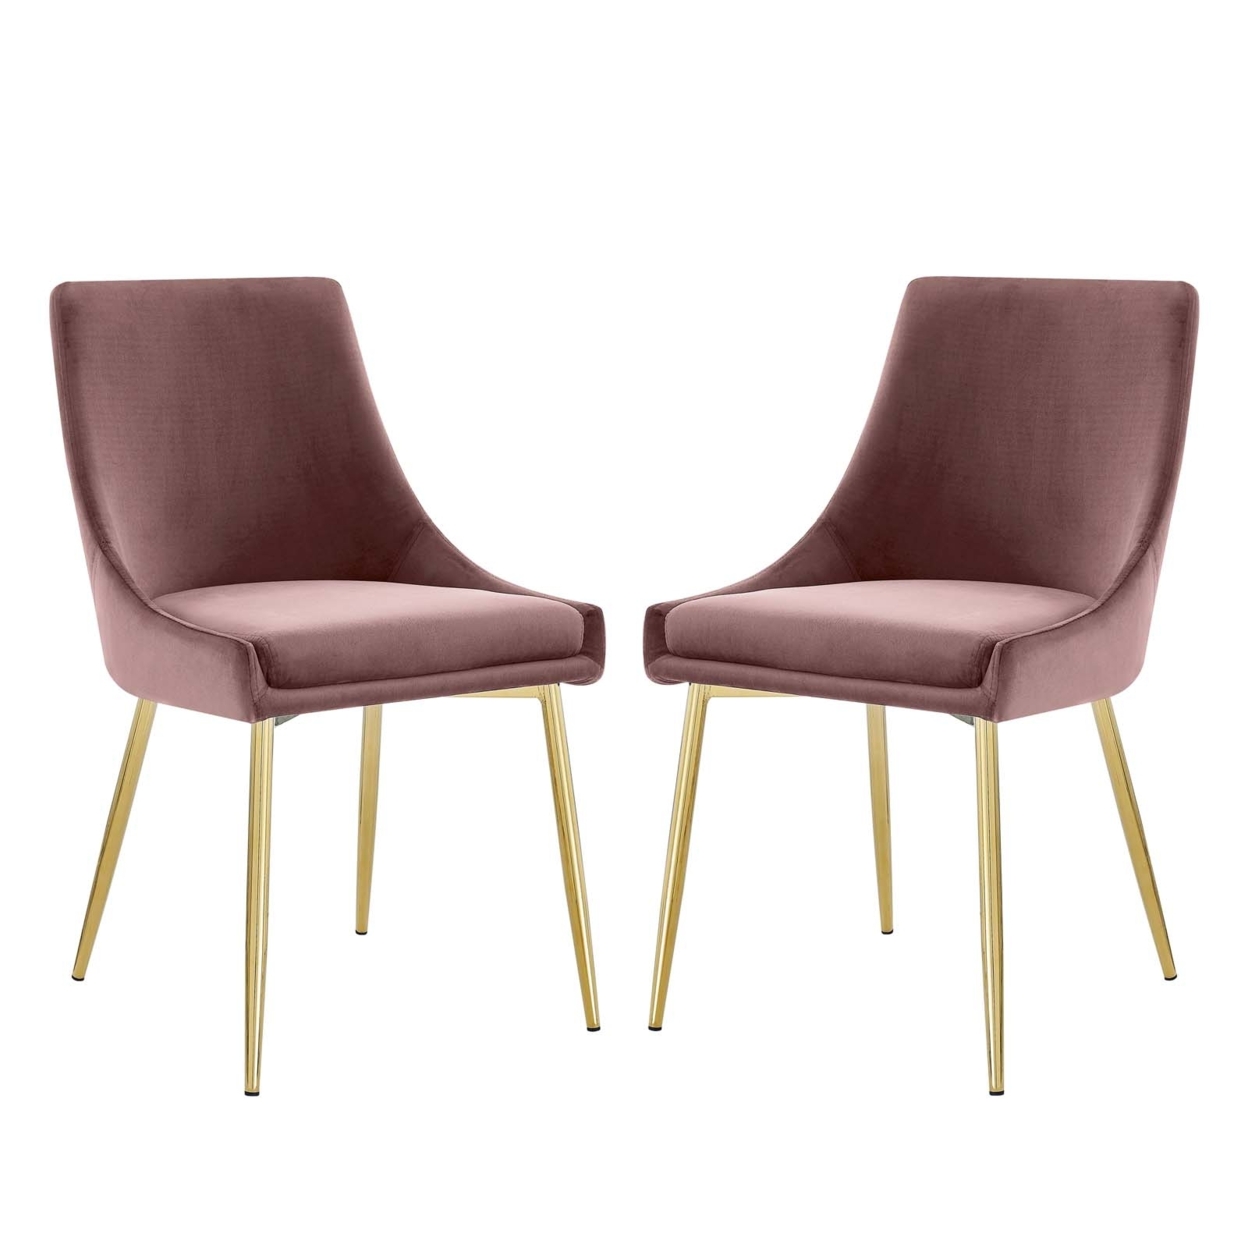 Viscount Performance Velvet Dining Chairs - Set Of 2, Gold Dusty Rose